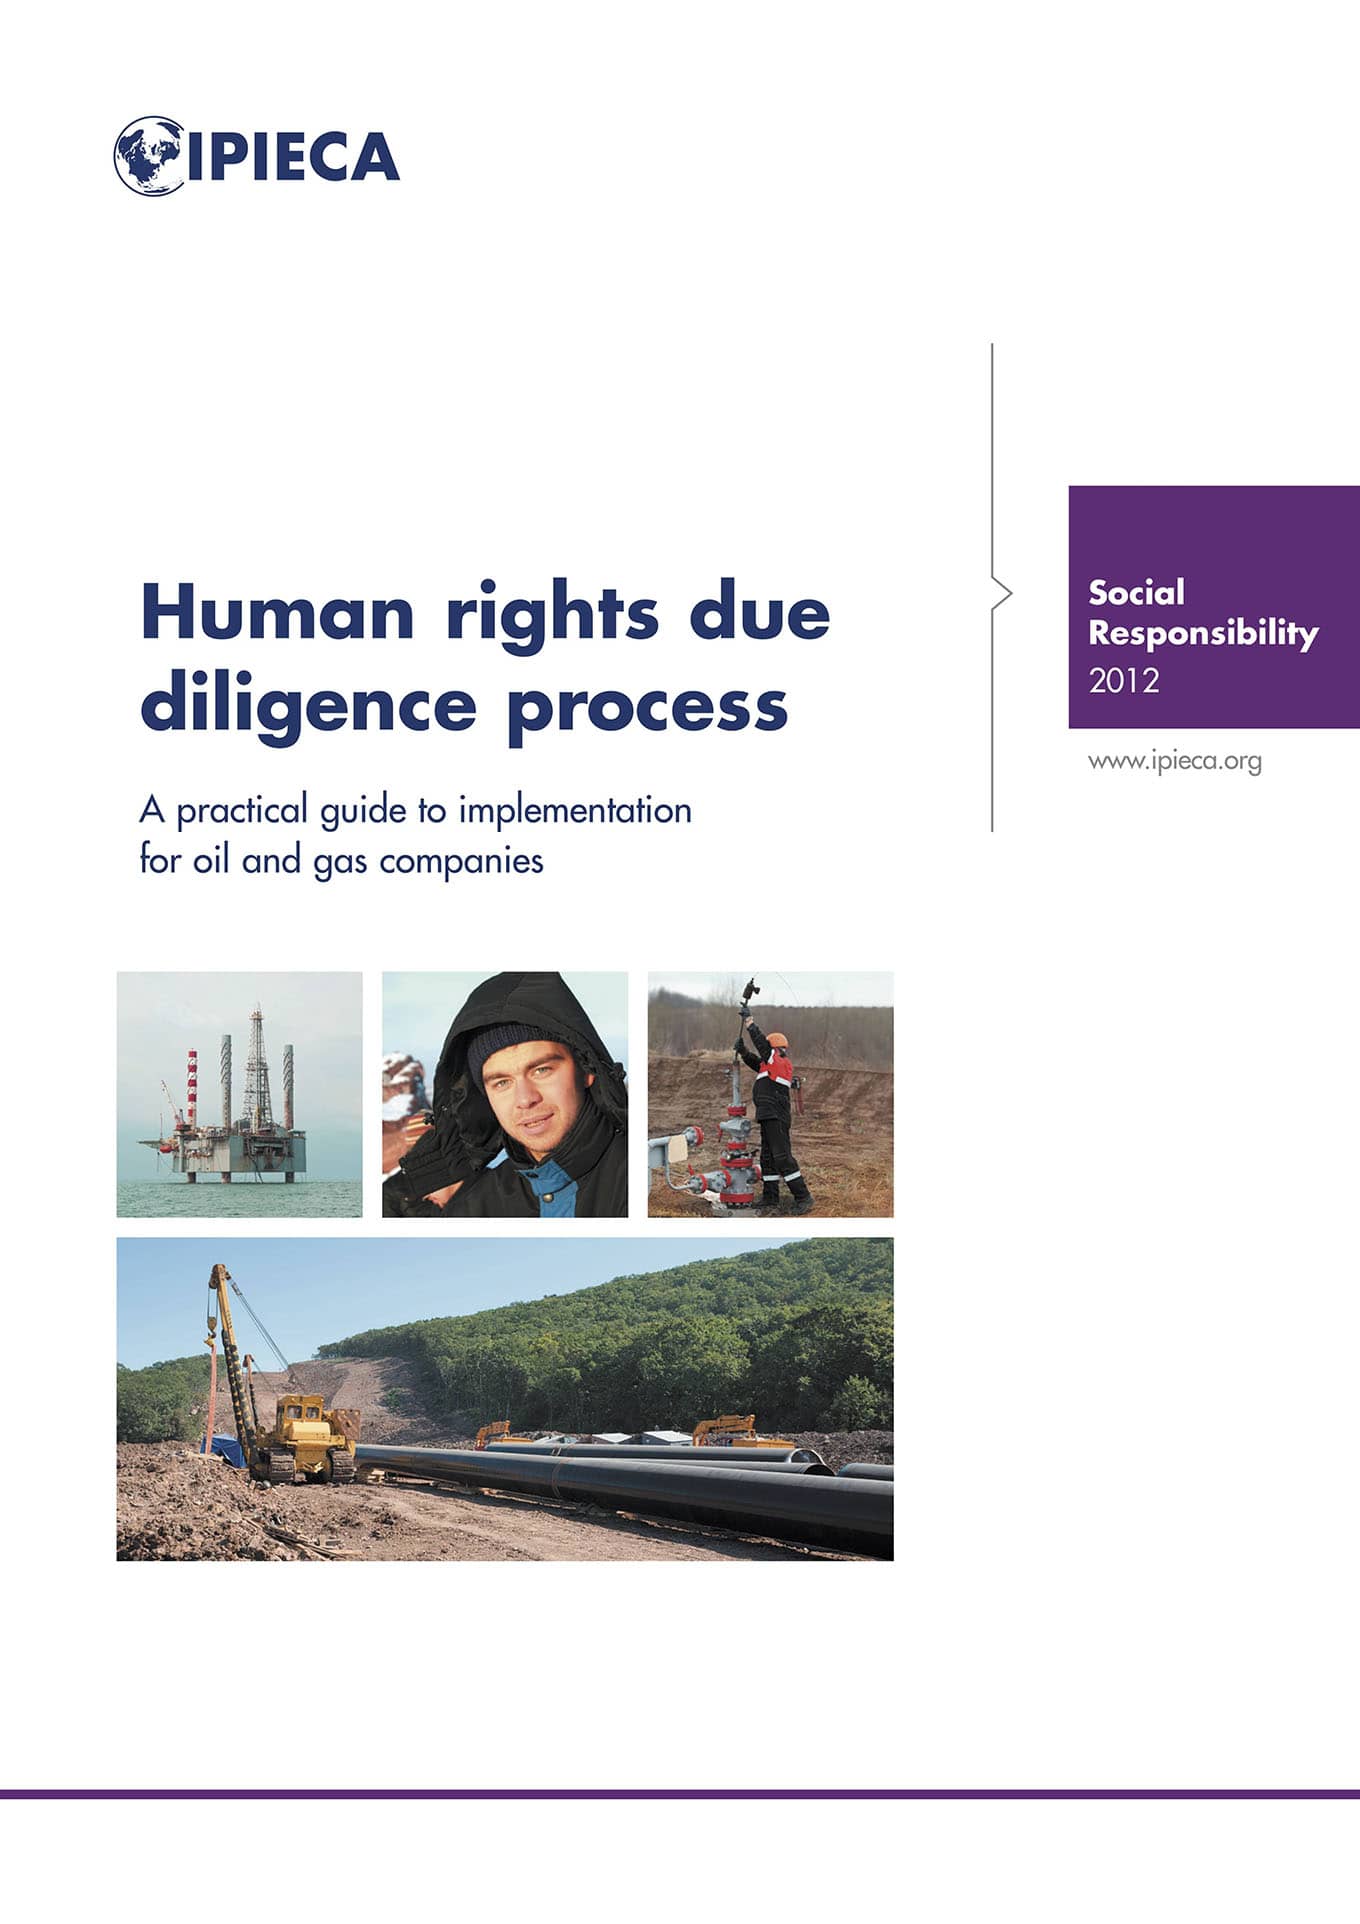 Human Rights Due Diligence Process: A Practical Guide to Implementation for Oil and Gas Companies (IPIECA, 2012)